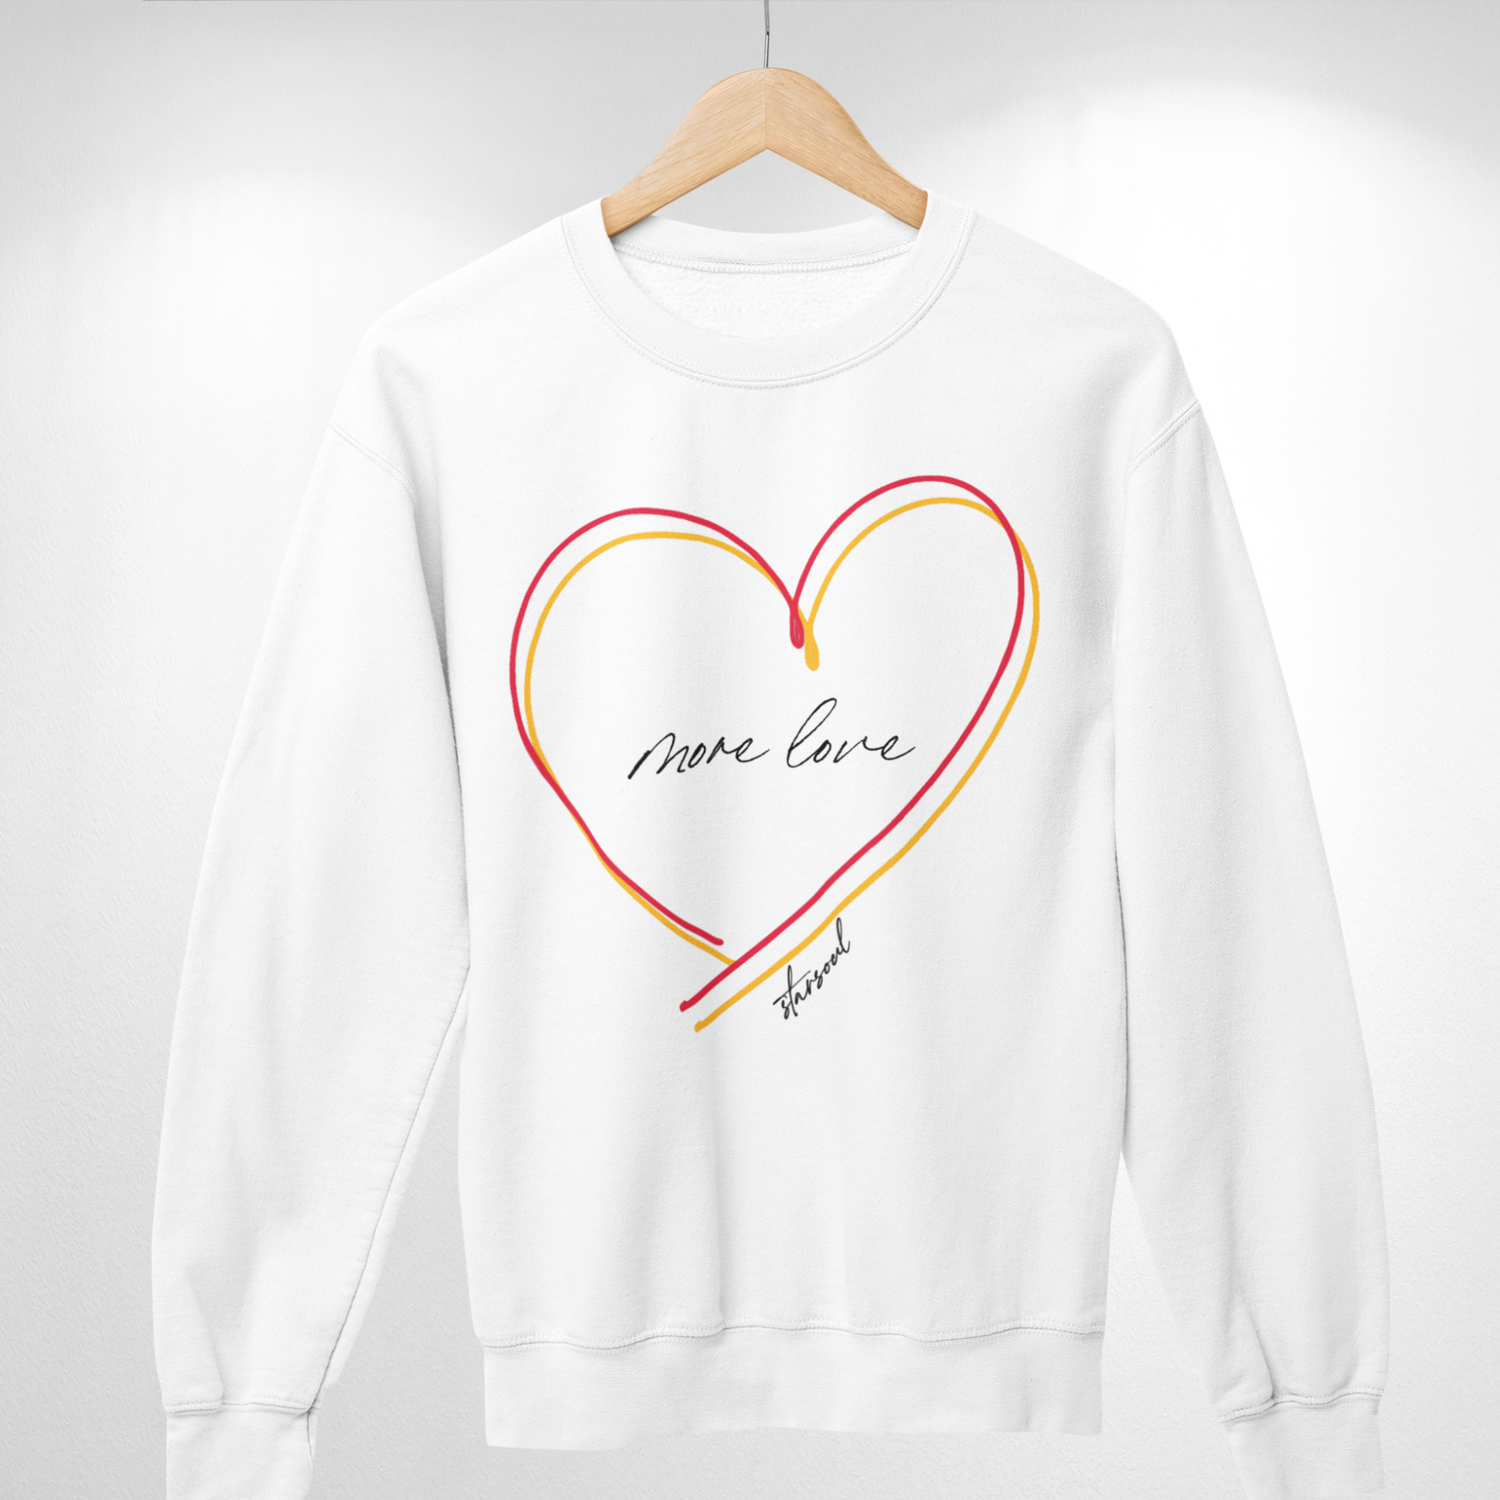 white sweatshirt with yellow and red heart (text: more love).Every purchase from the #KCstrong collection donates 100% of the proceeds to the Kansas City Strong emergency fund created by the Chiefs and the United Way of Kansas City.